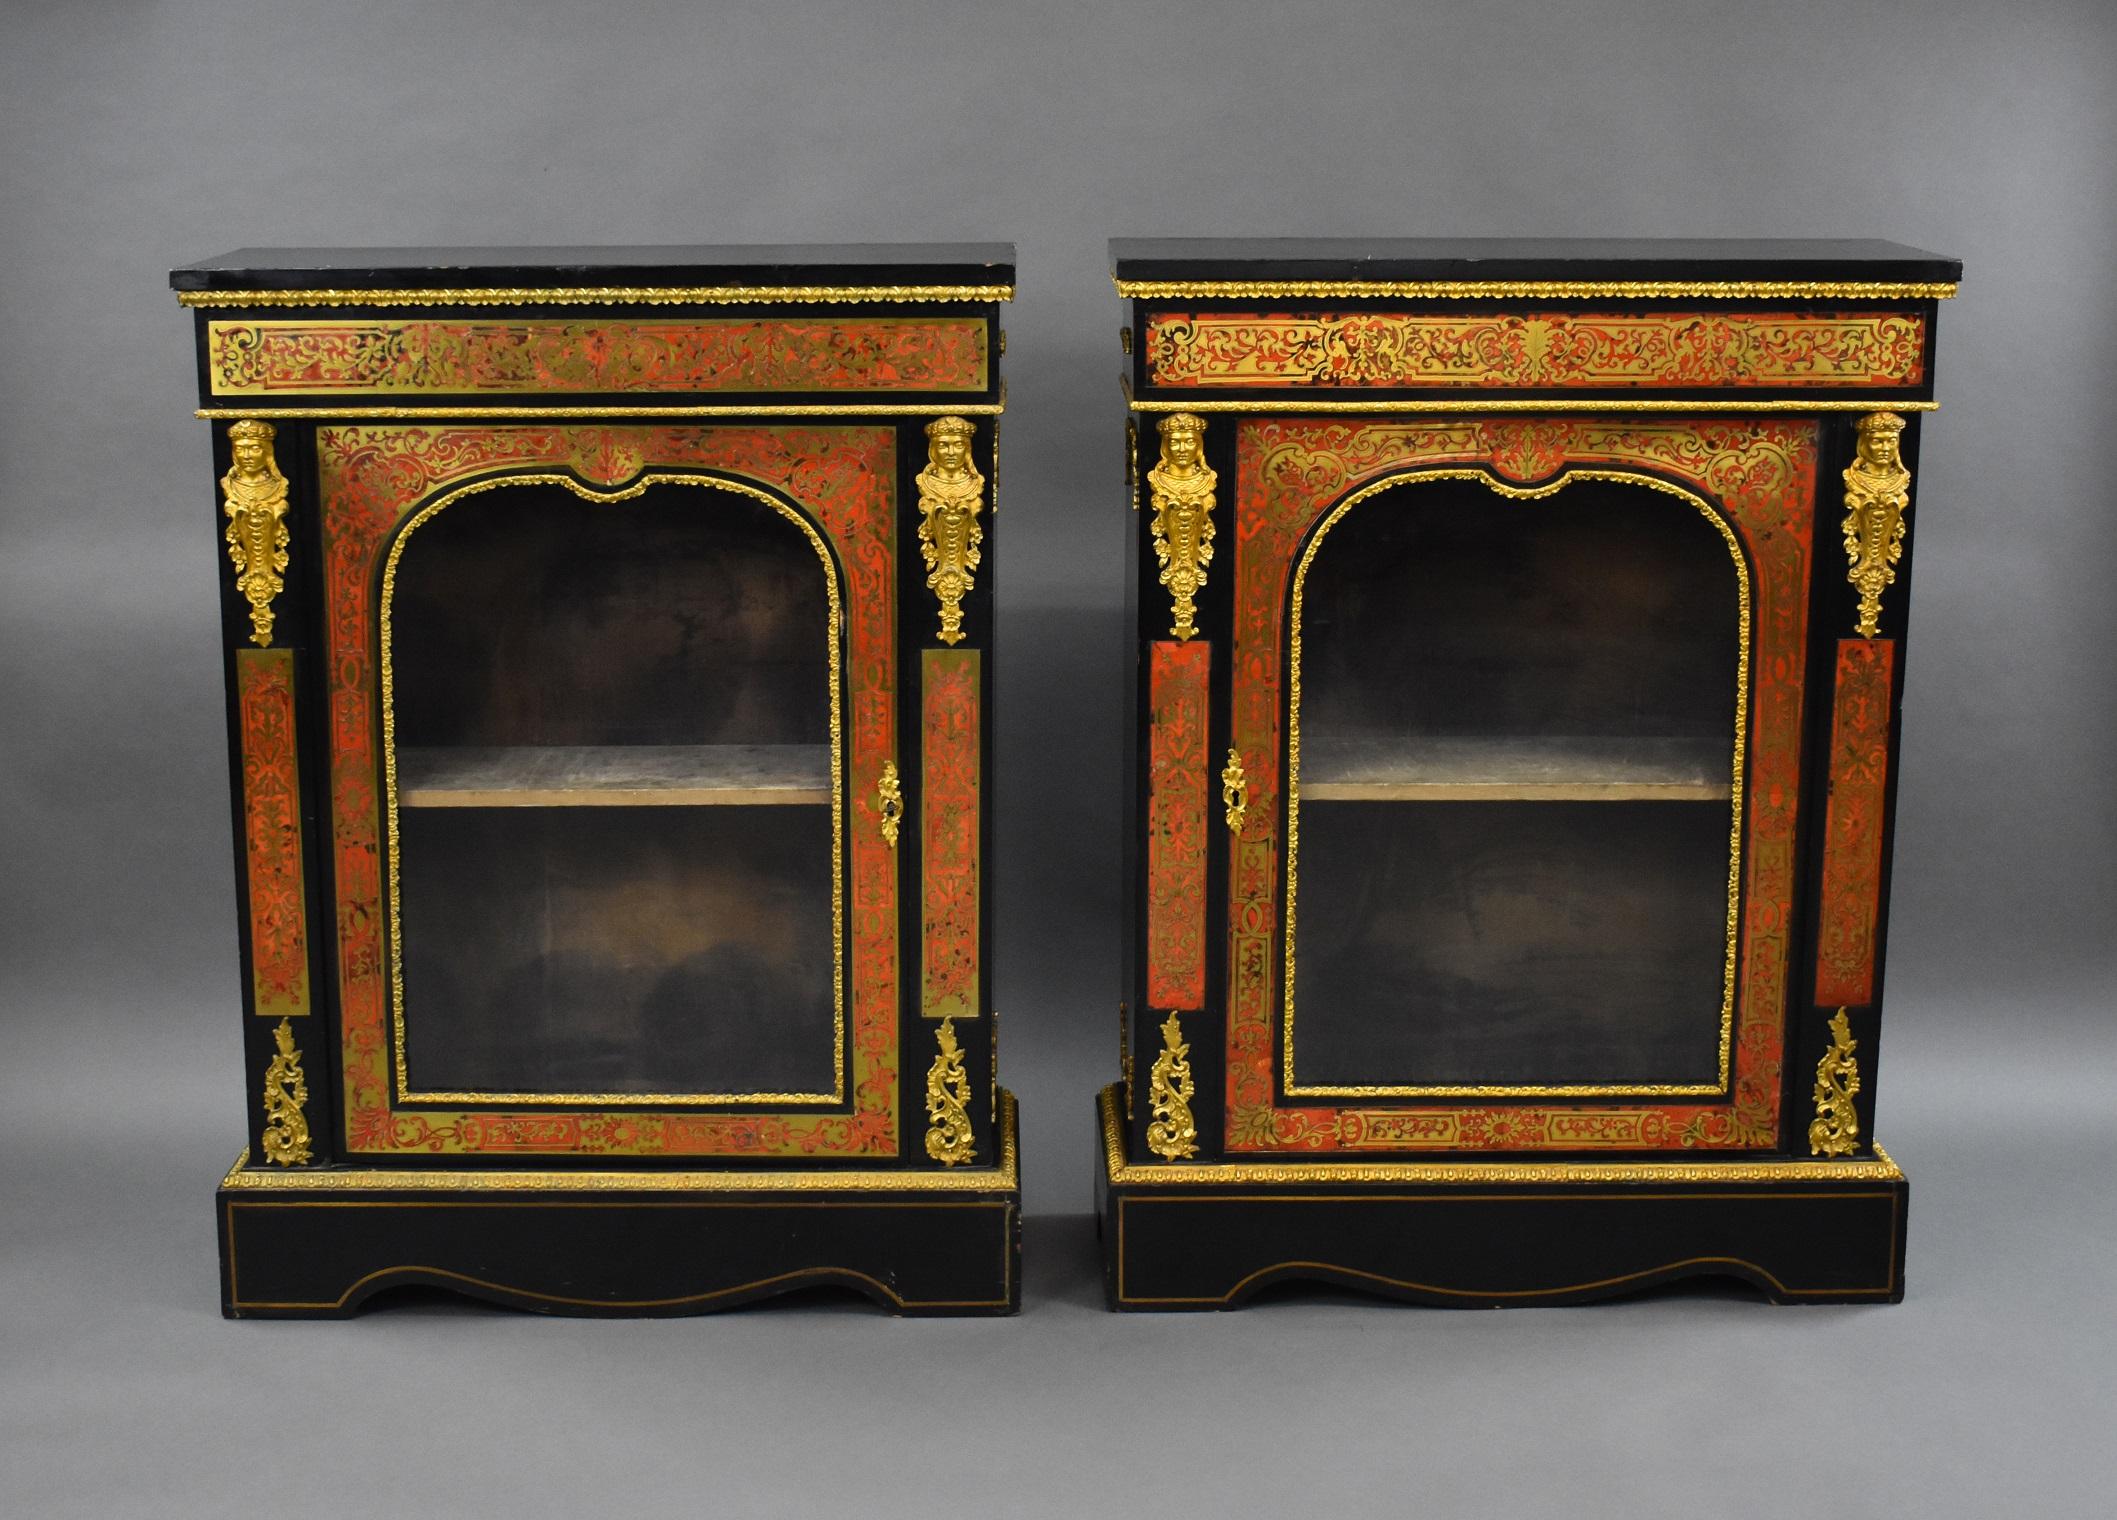 For sale is a good quality pair of ebonised Boulle pier cabinets, each with a rectangular top above a deep frieze and an arched glazed door flanked by masks above a plinth base. Both cabinets are in good condition, showing minor signs of wear